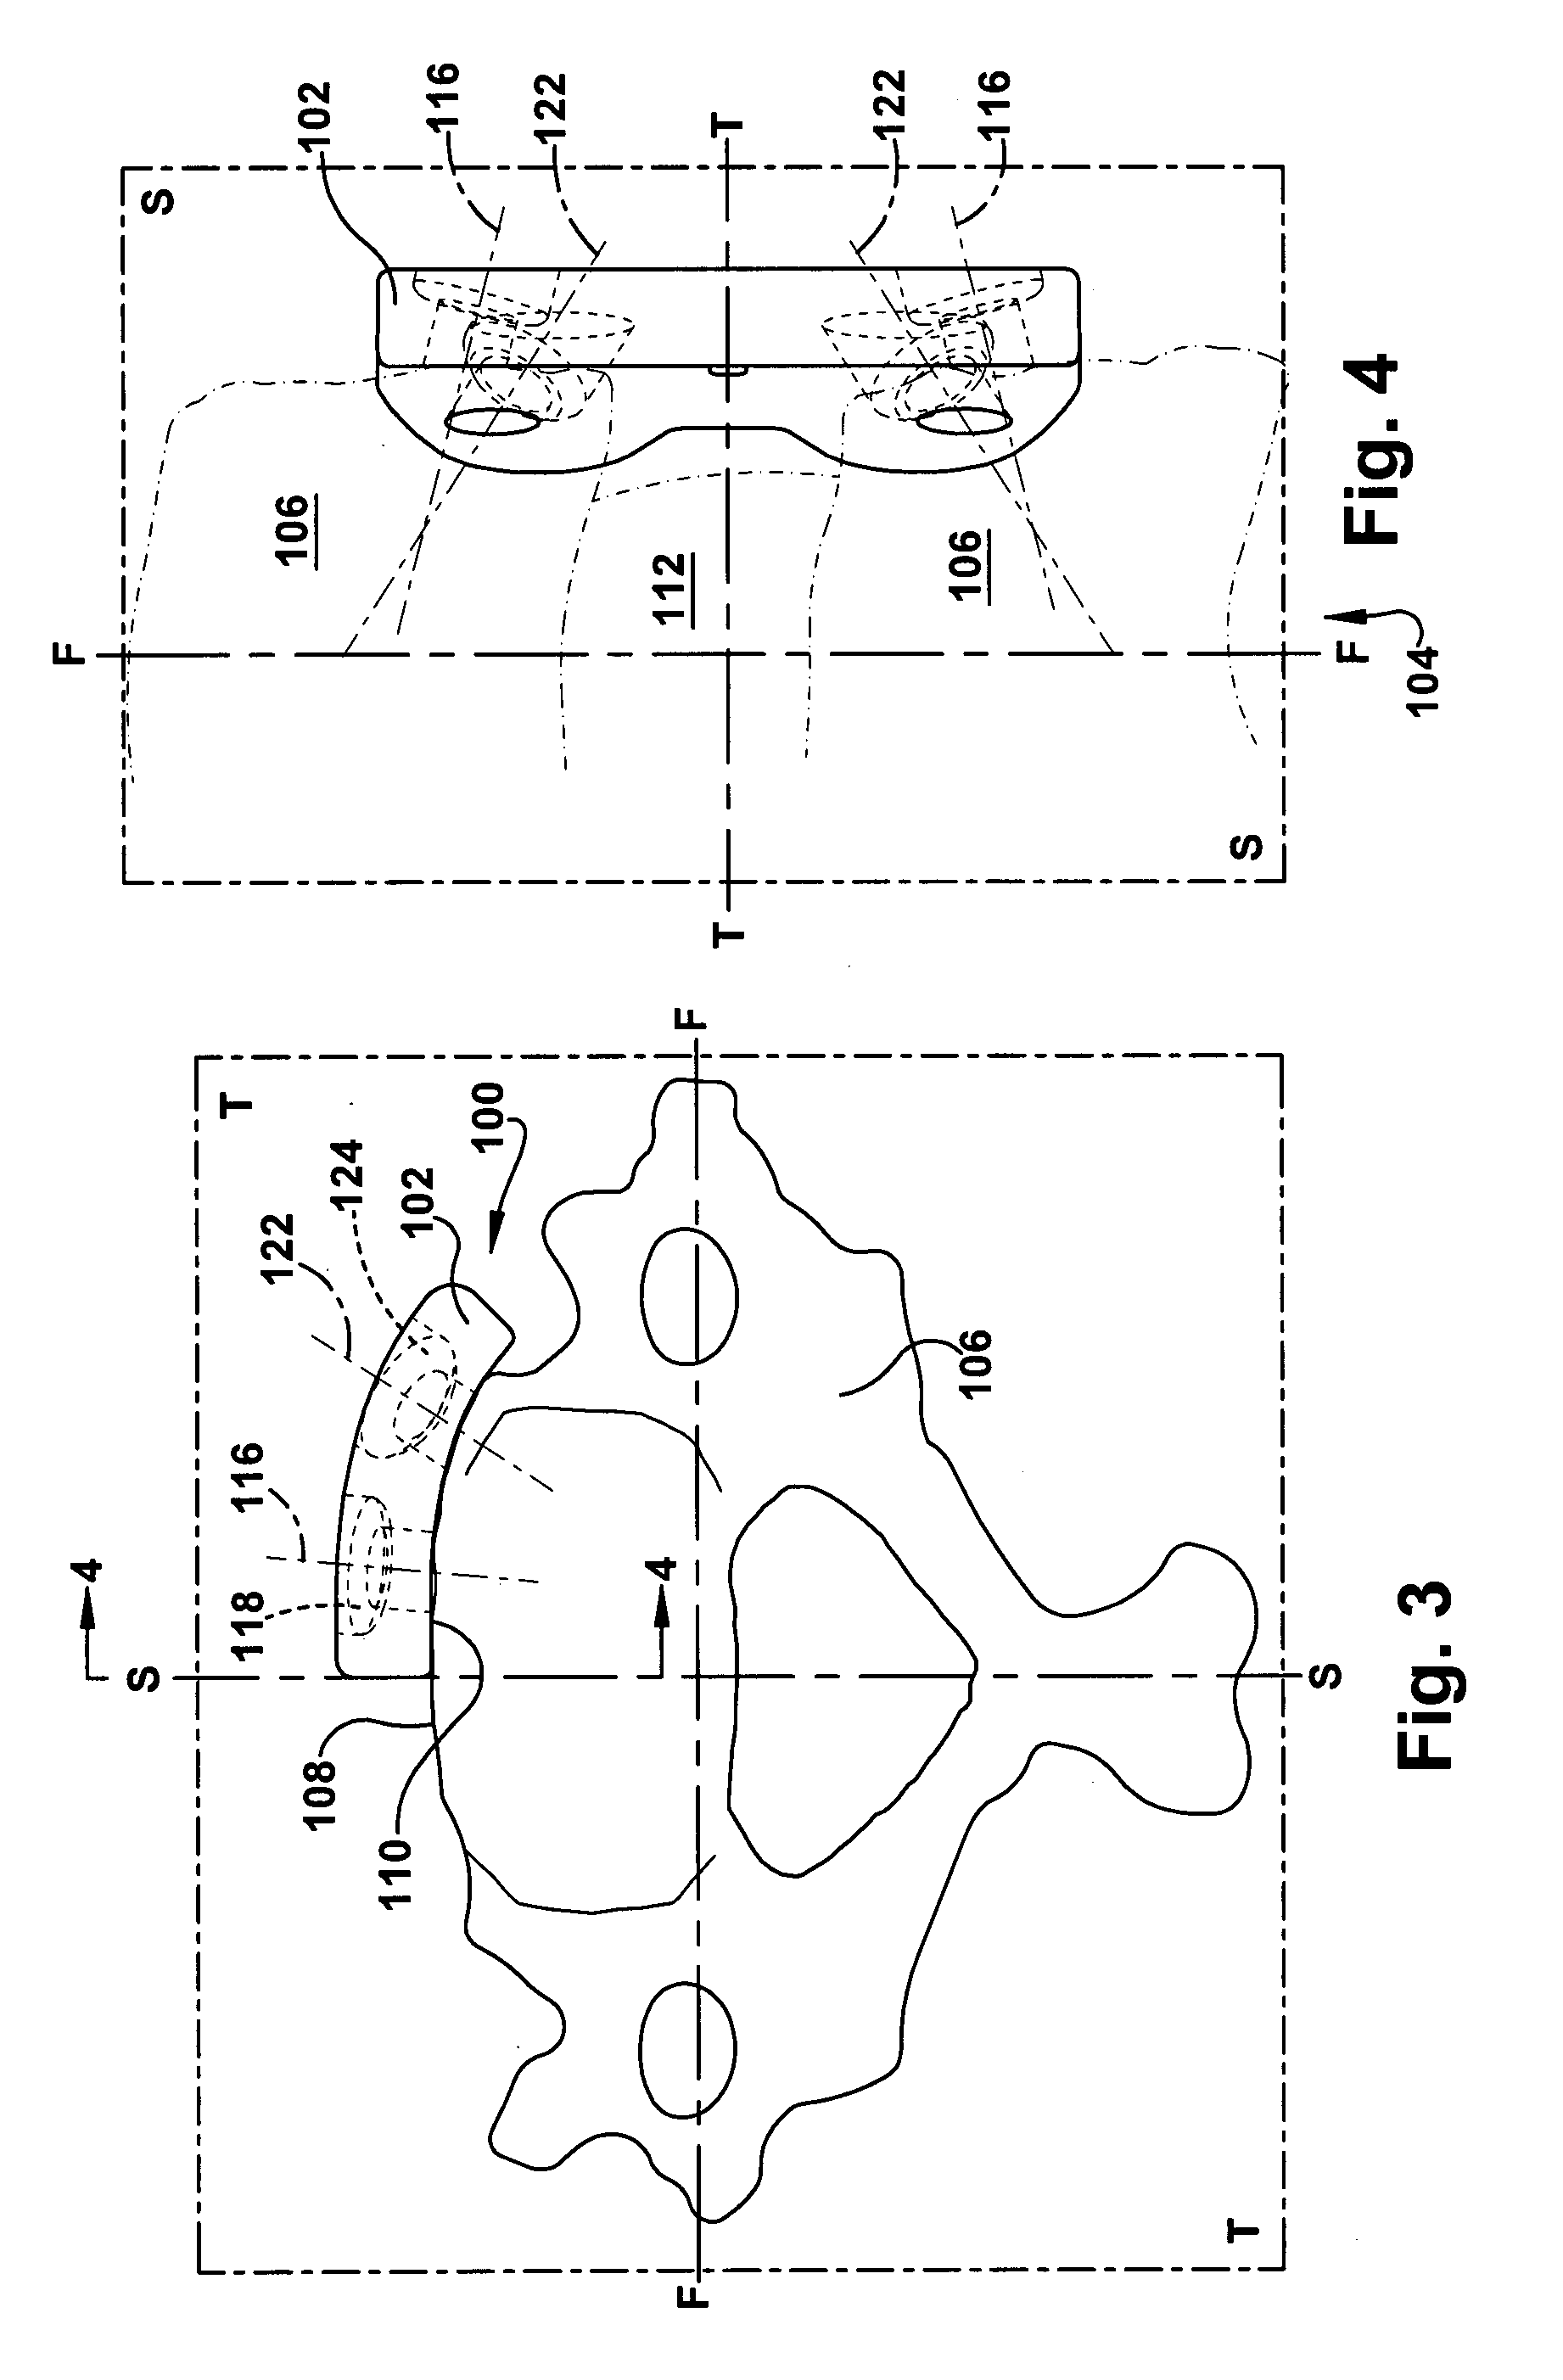 Cervical fusion apparatus and method for use